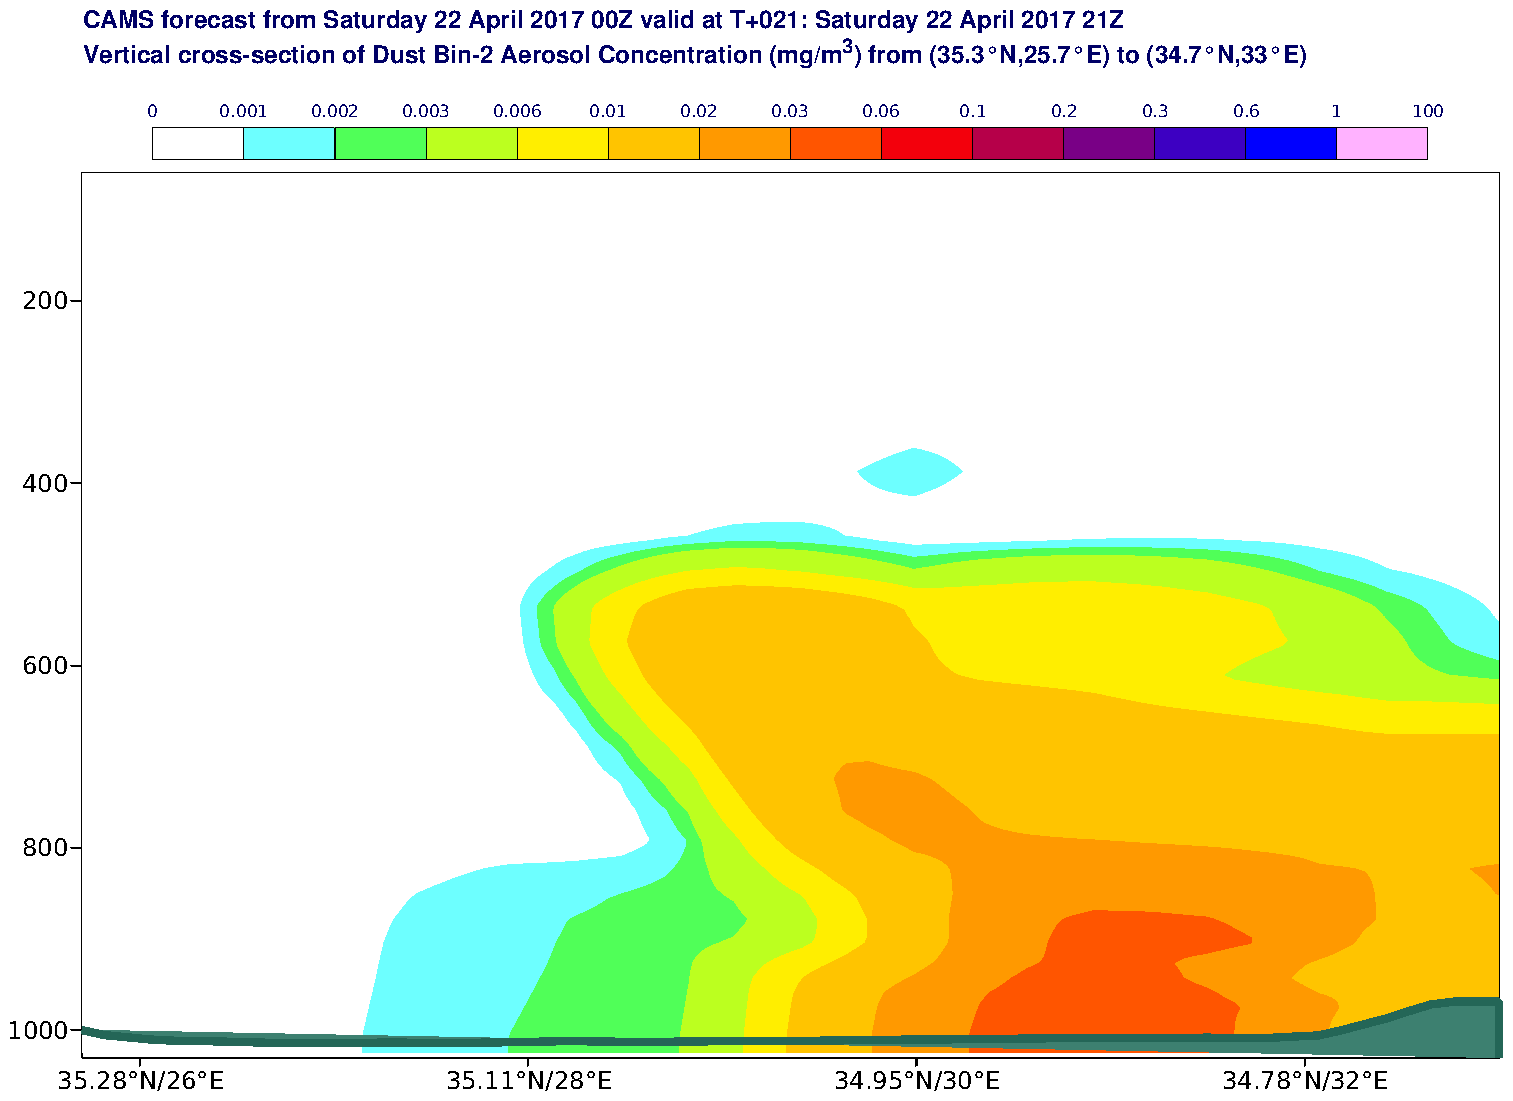 Vertical cross-section of Dust Bin-2 Aerosol Concentration (mg/m3) valid at T21 - 2017-04-22 21:00